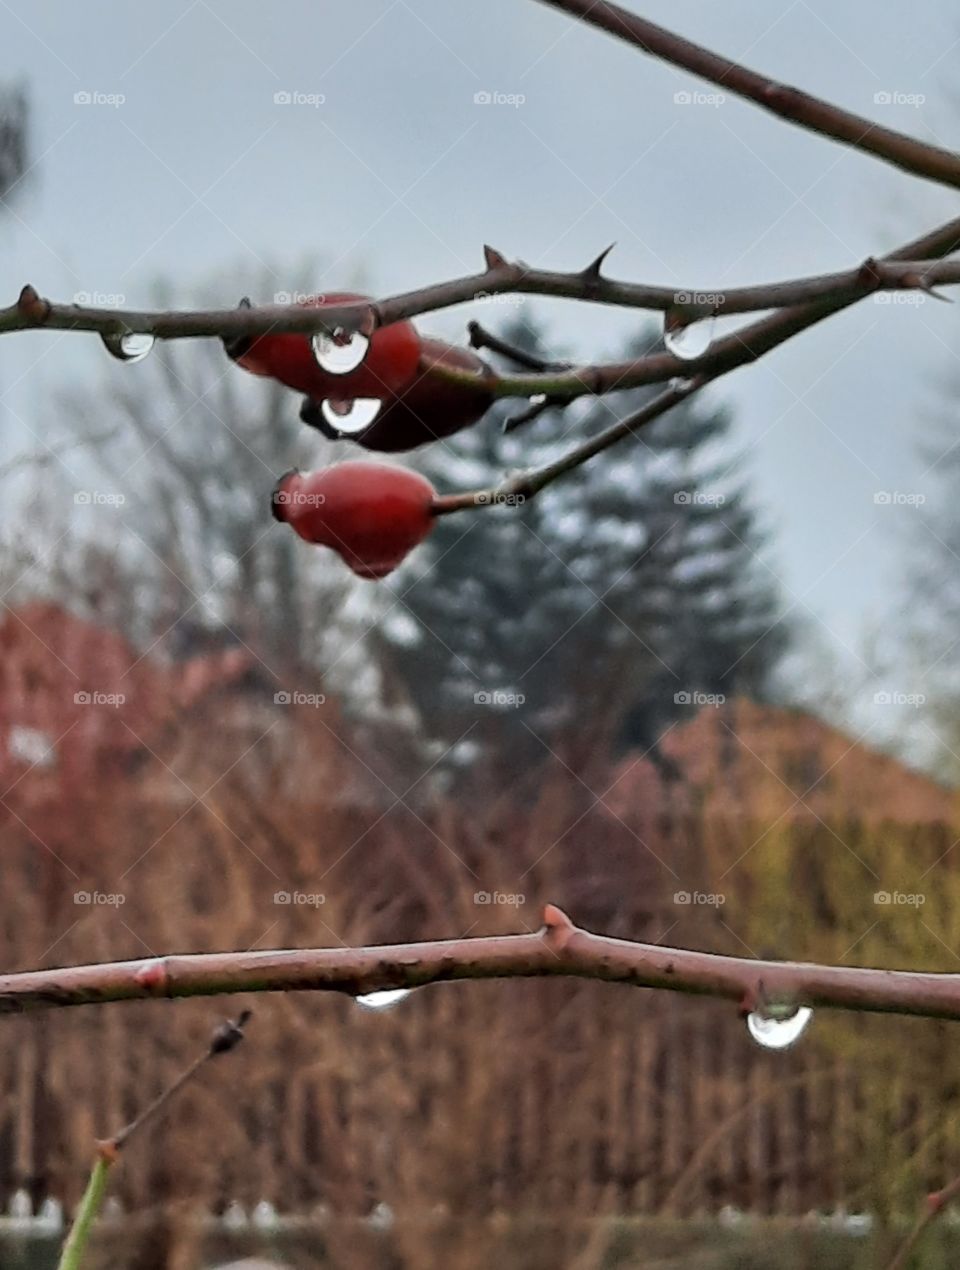 winter garden after thaw with rose hips and rain drops